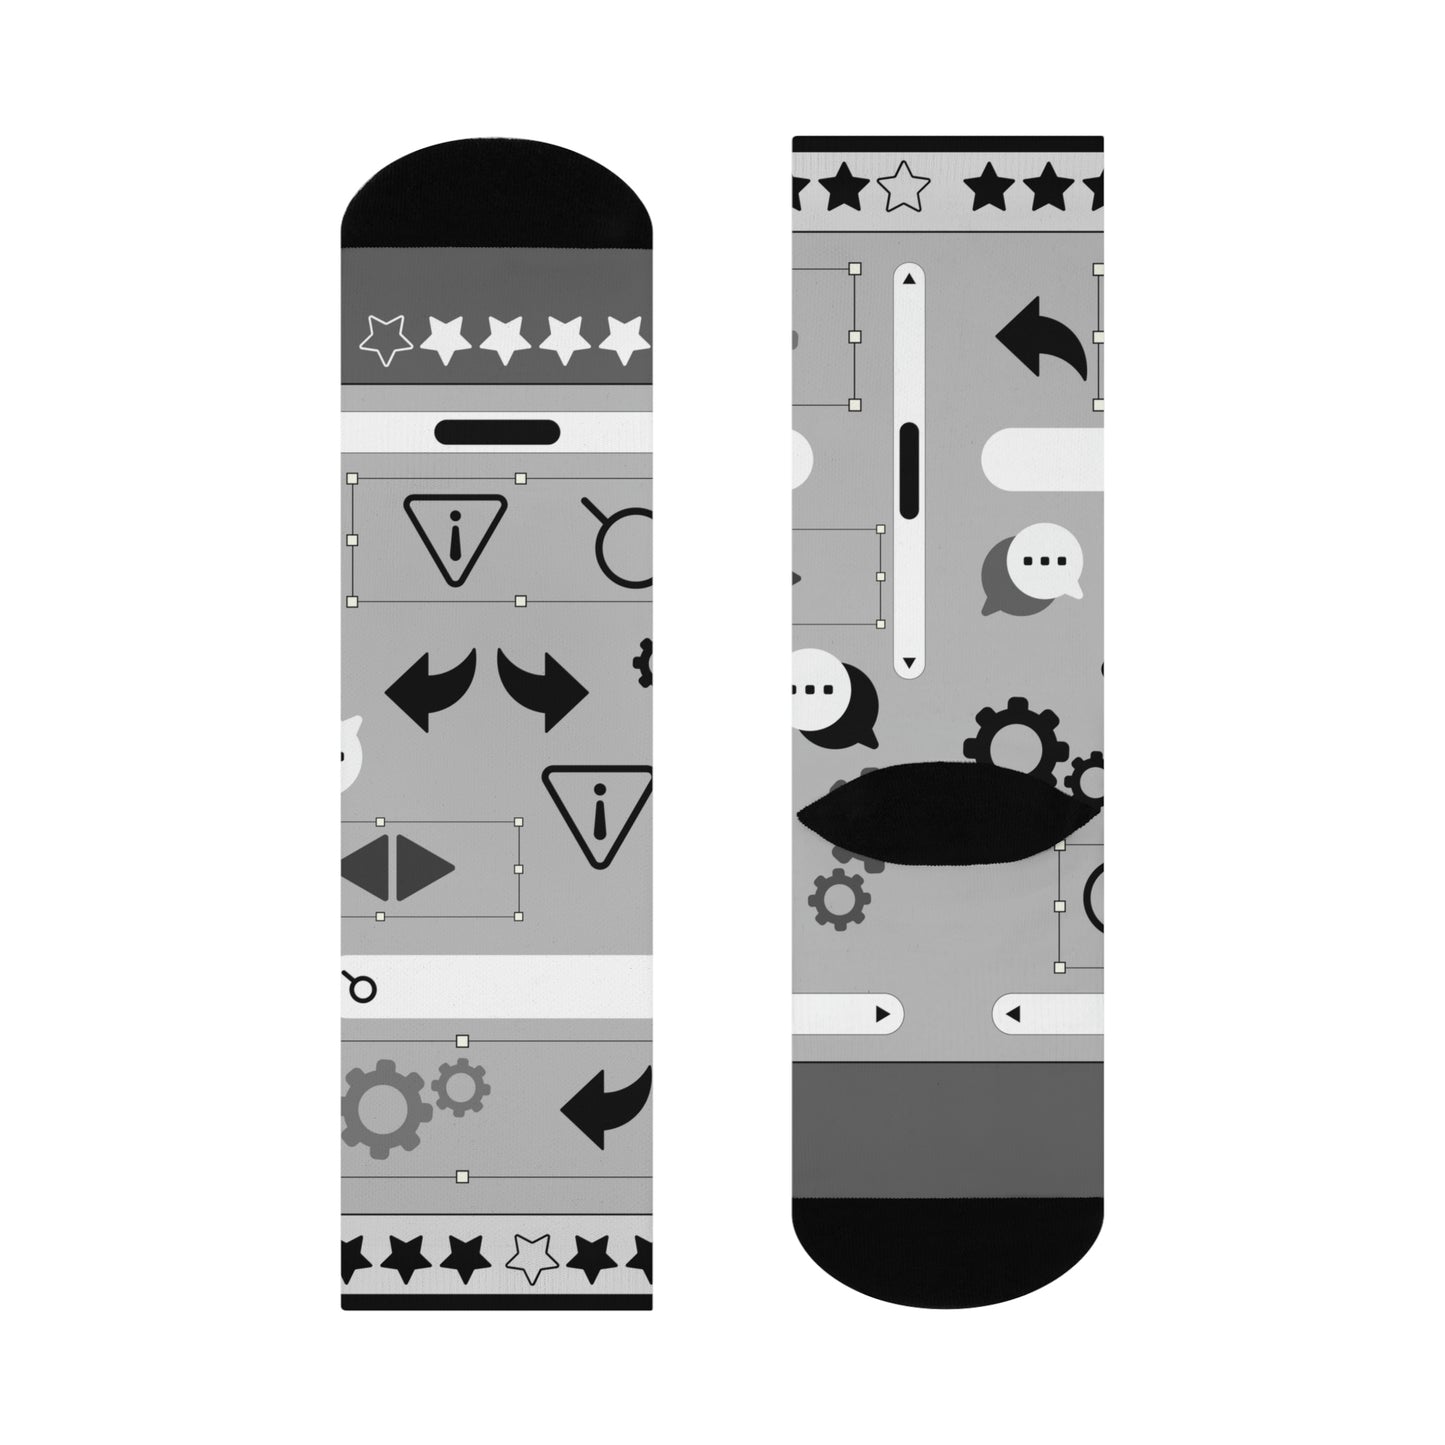 User Experience (UX) Socks, Components